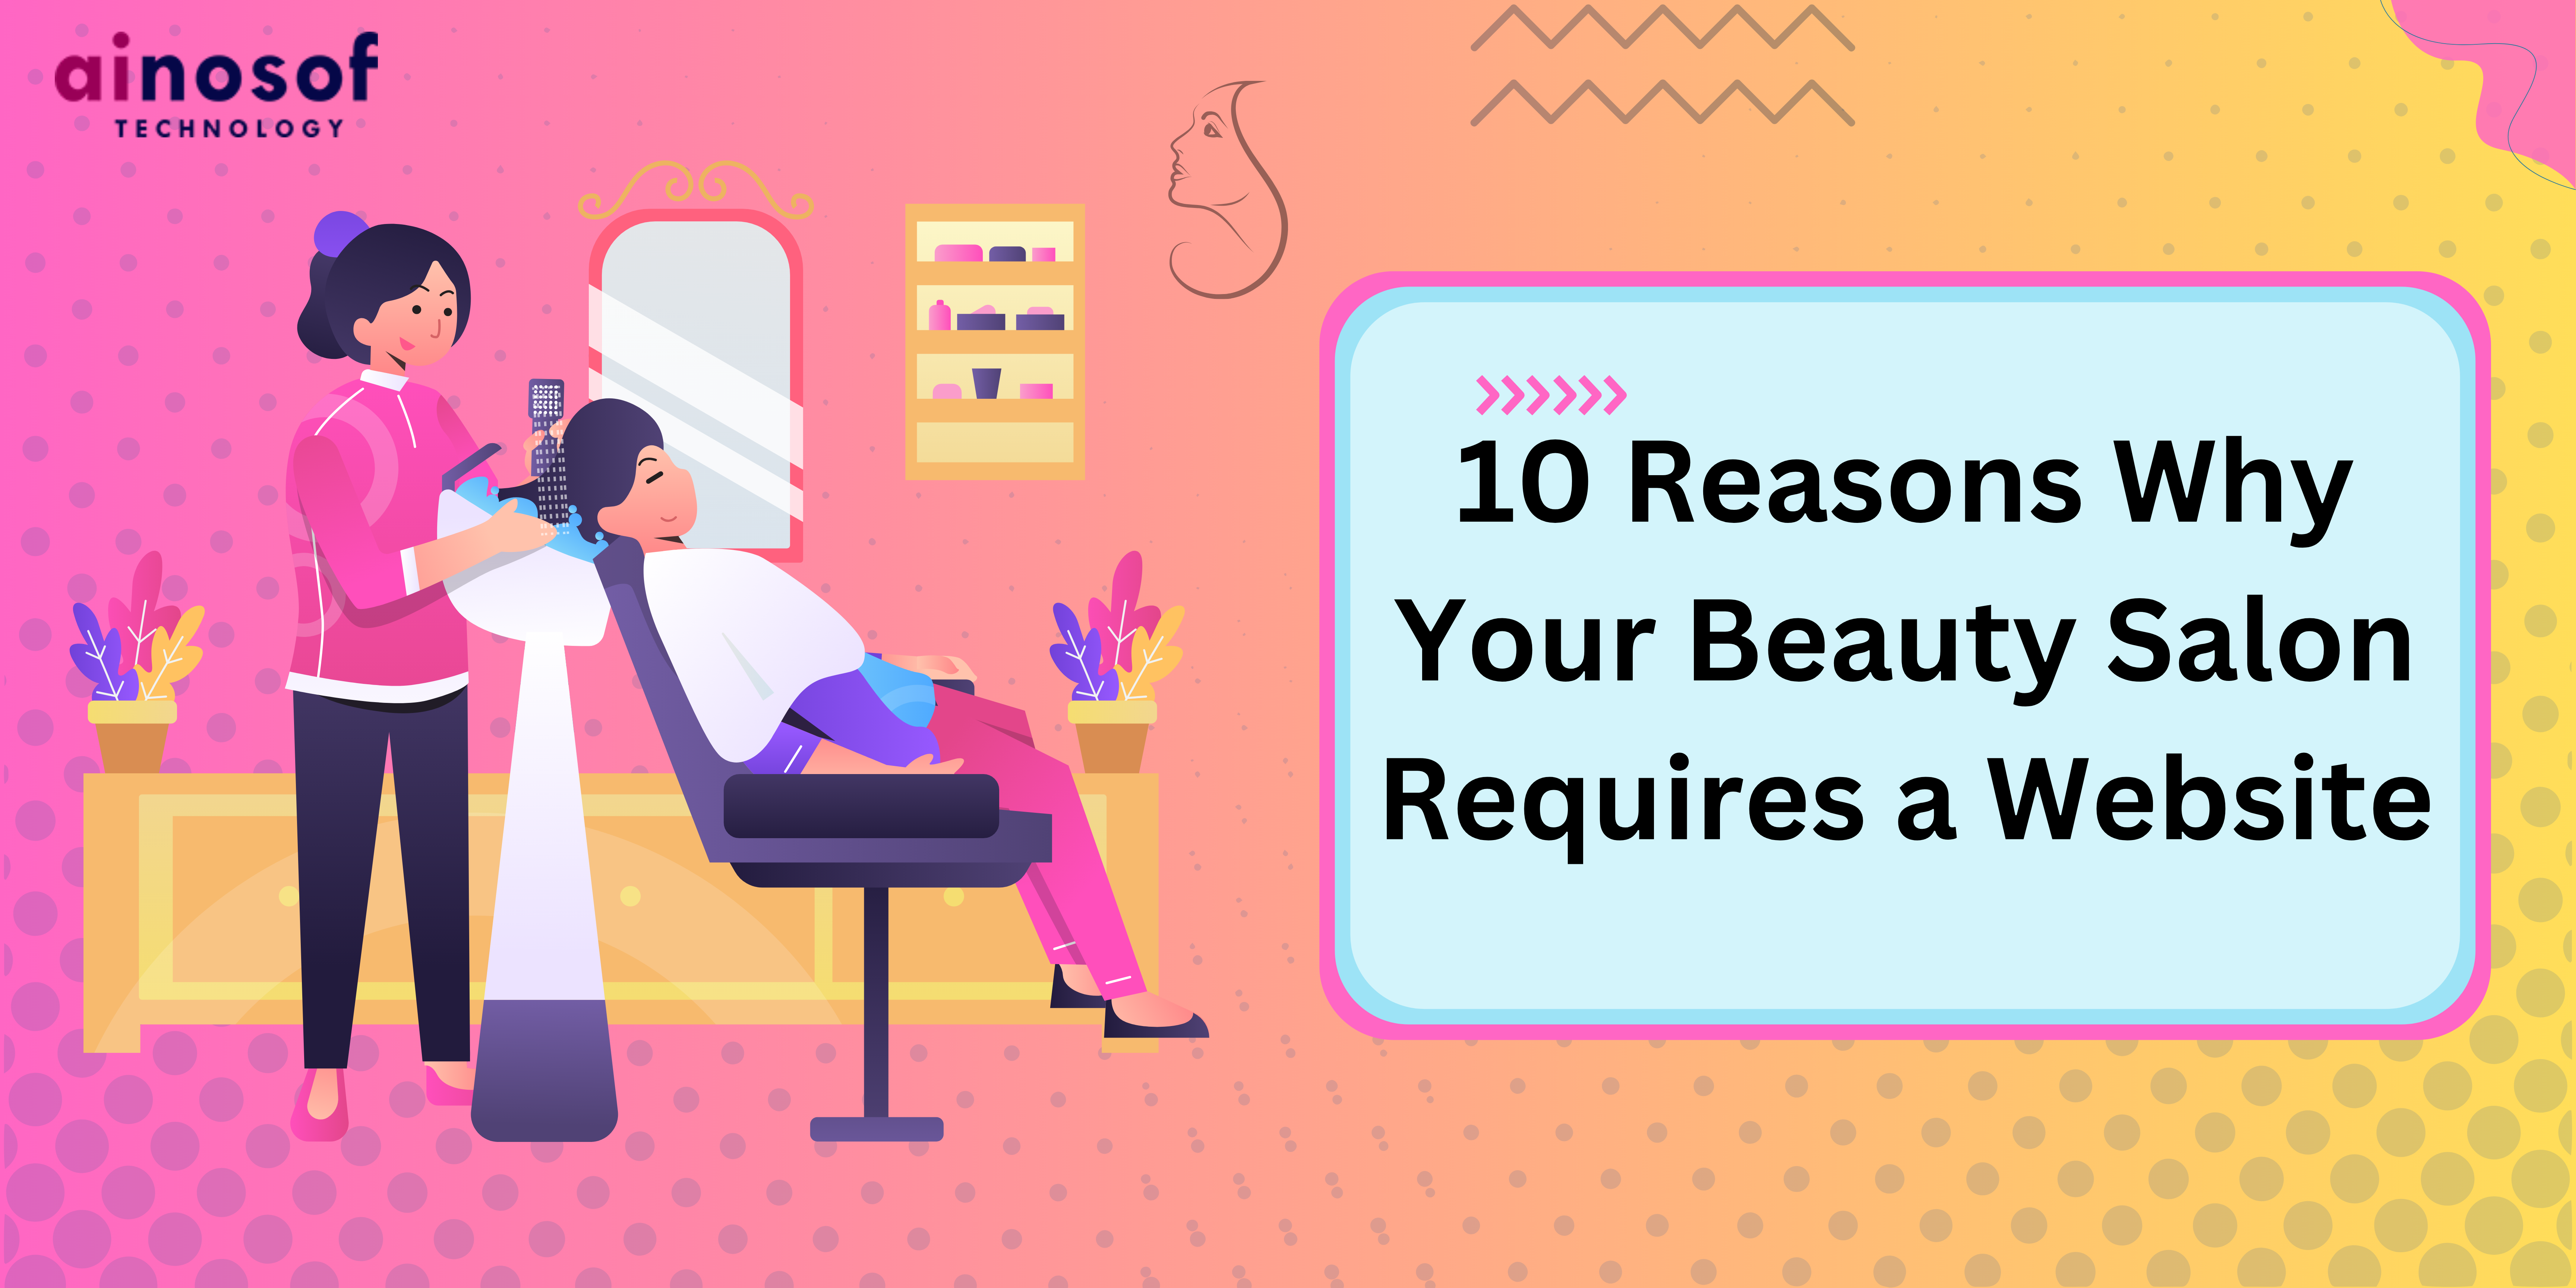 10 Reasons Why Your Beauty Salon Requires a Website 